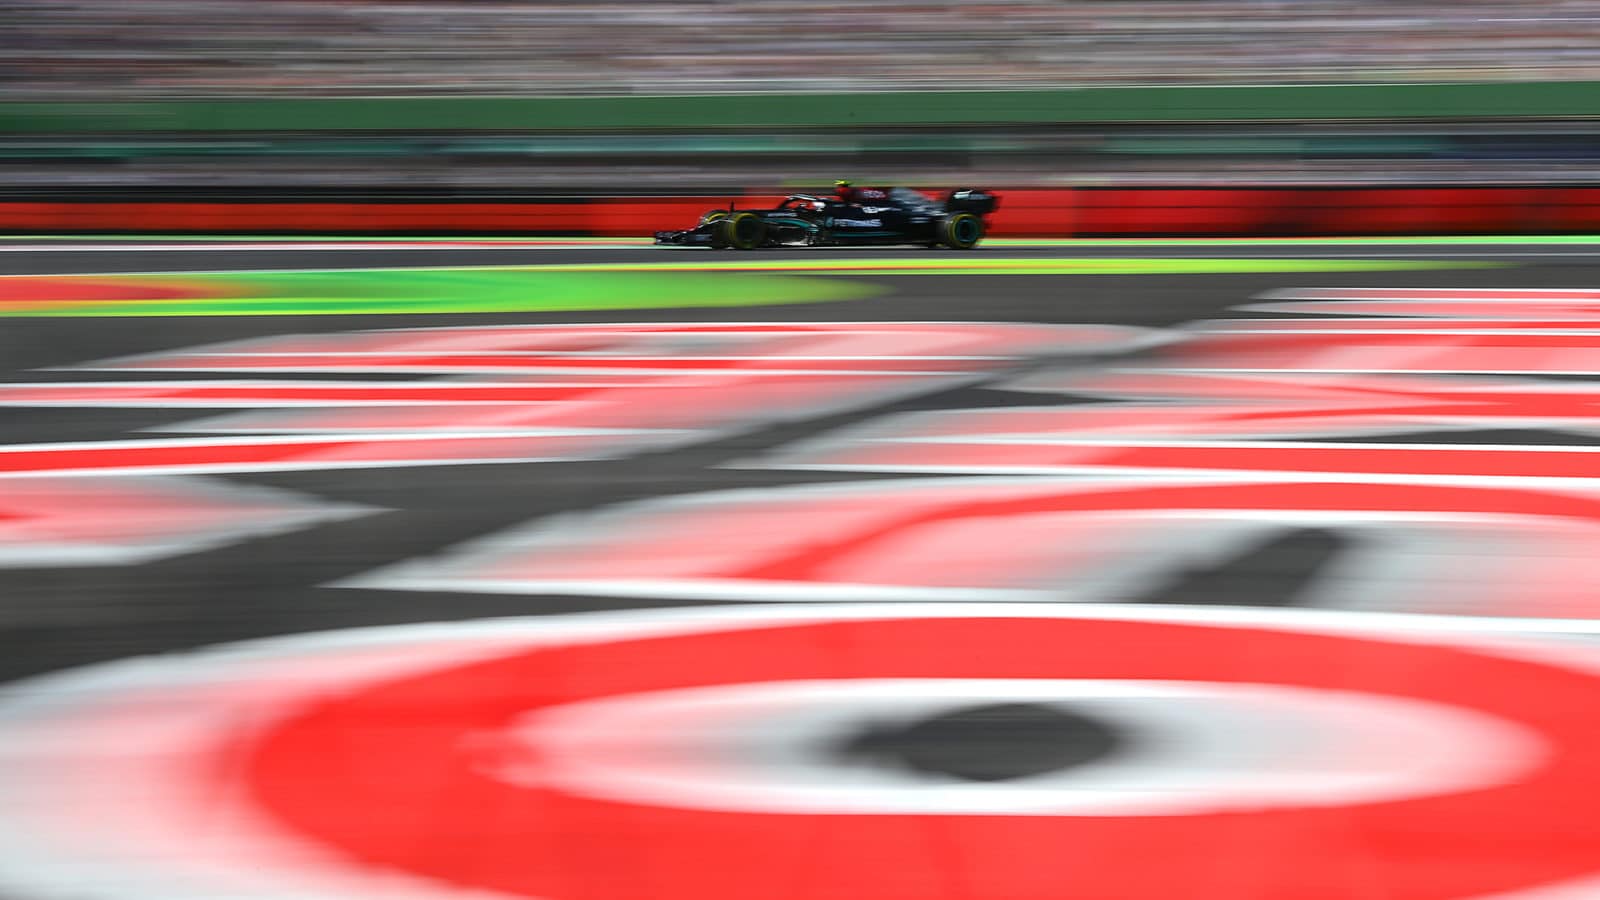 Valtteri Bottas in qualifying for the 2021 Mexican Grand prix